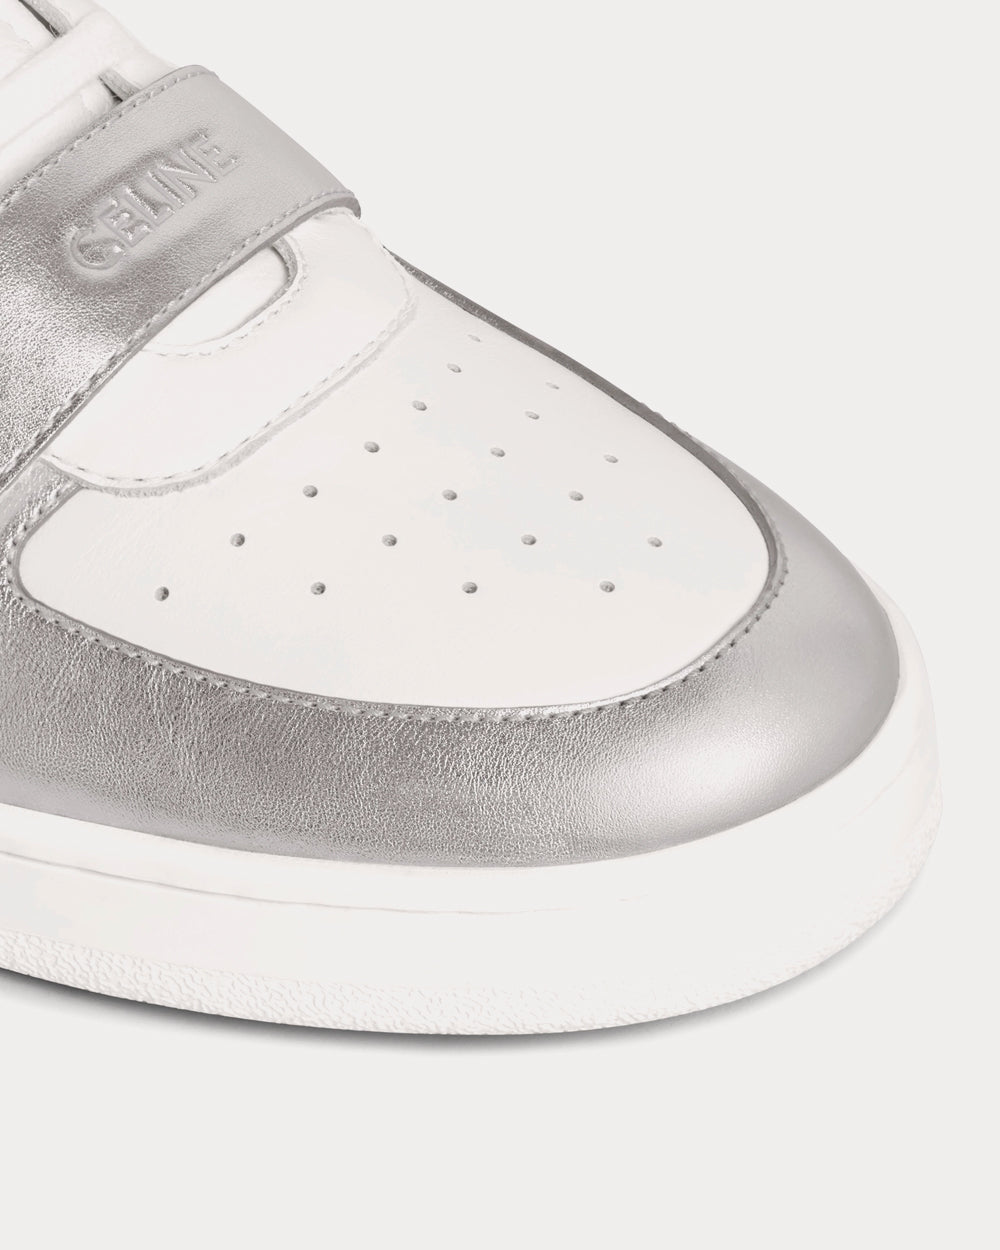 Celine - CT-02 Mid With Scratch In Calfskin Optic White / Silver High Top Sneakers